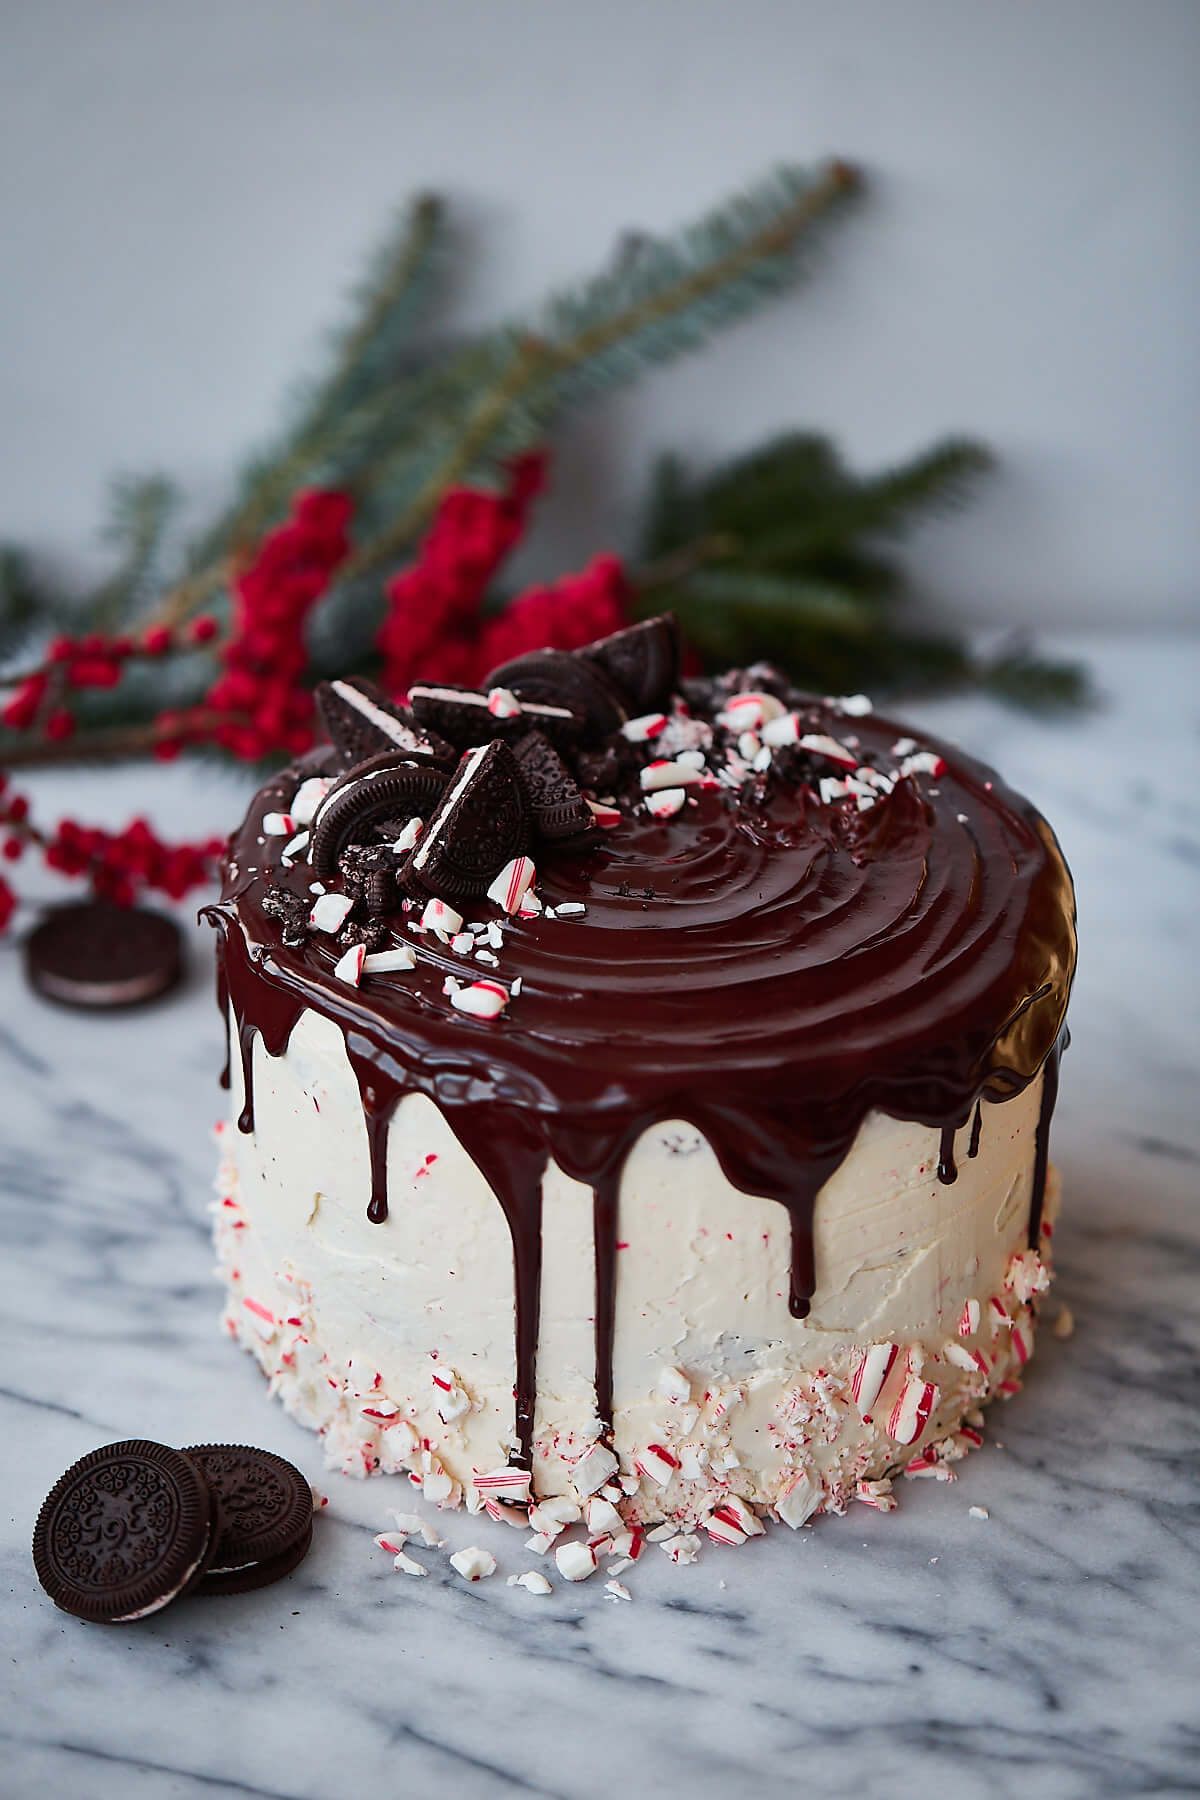 Candy cane crunch Christmas cake by A Beautiful Plate